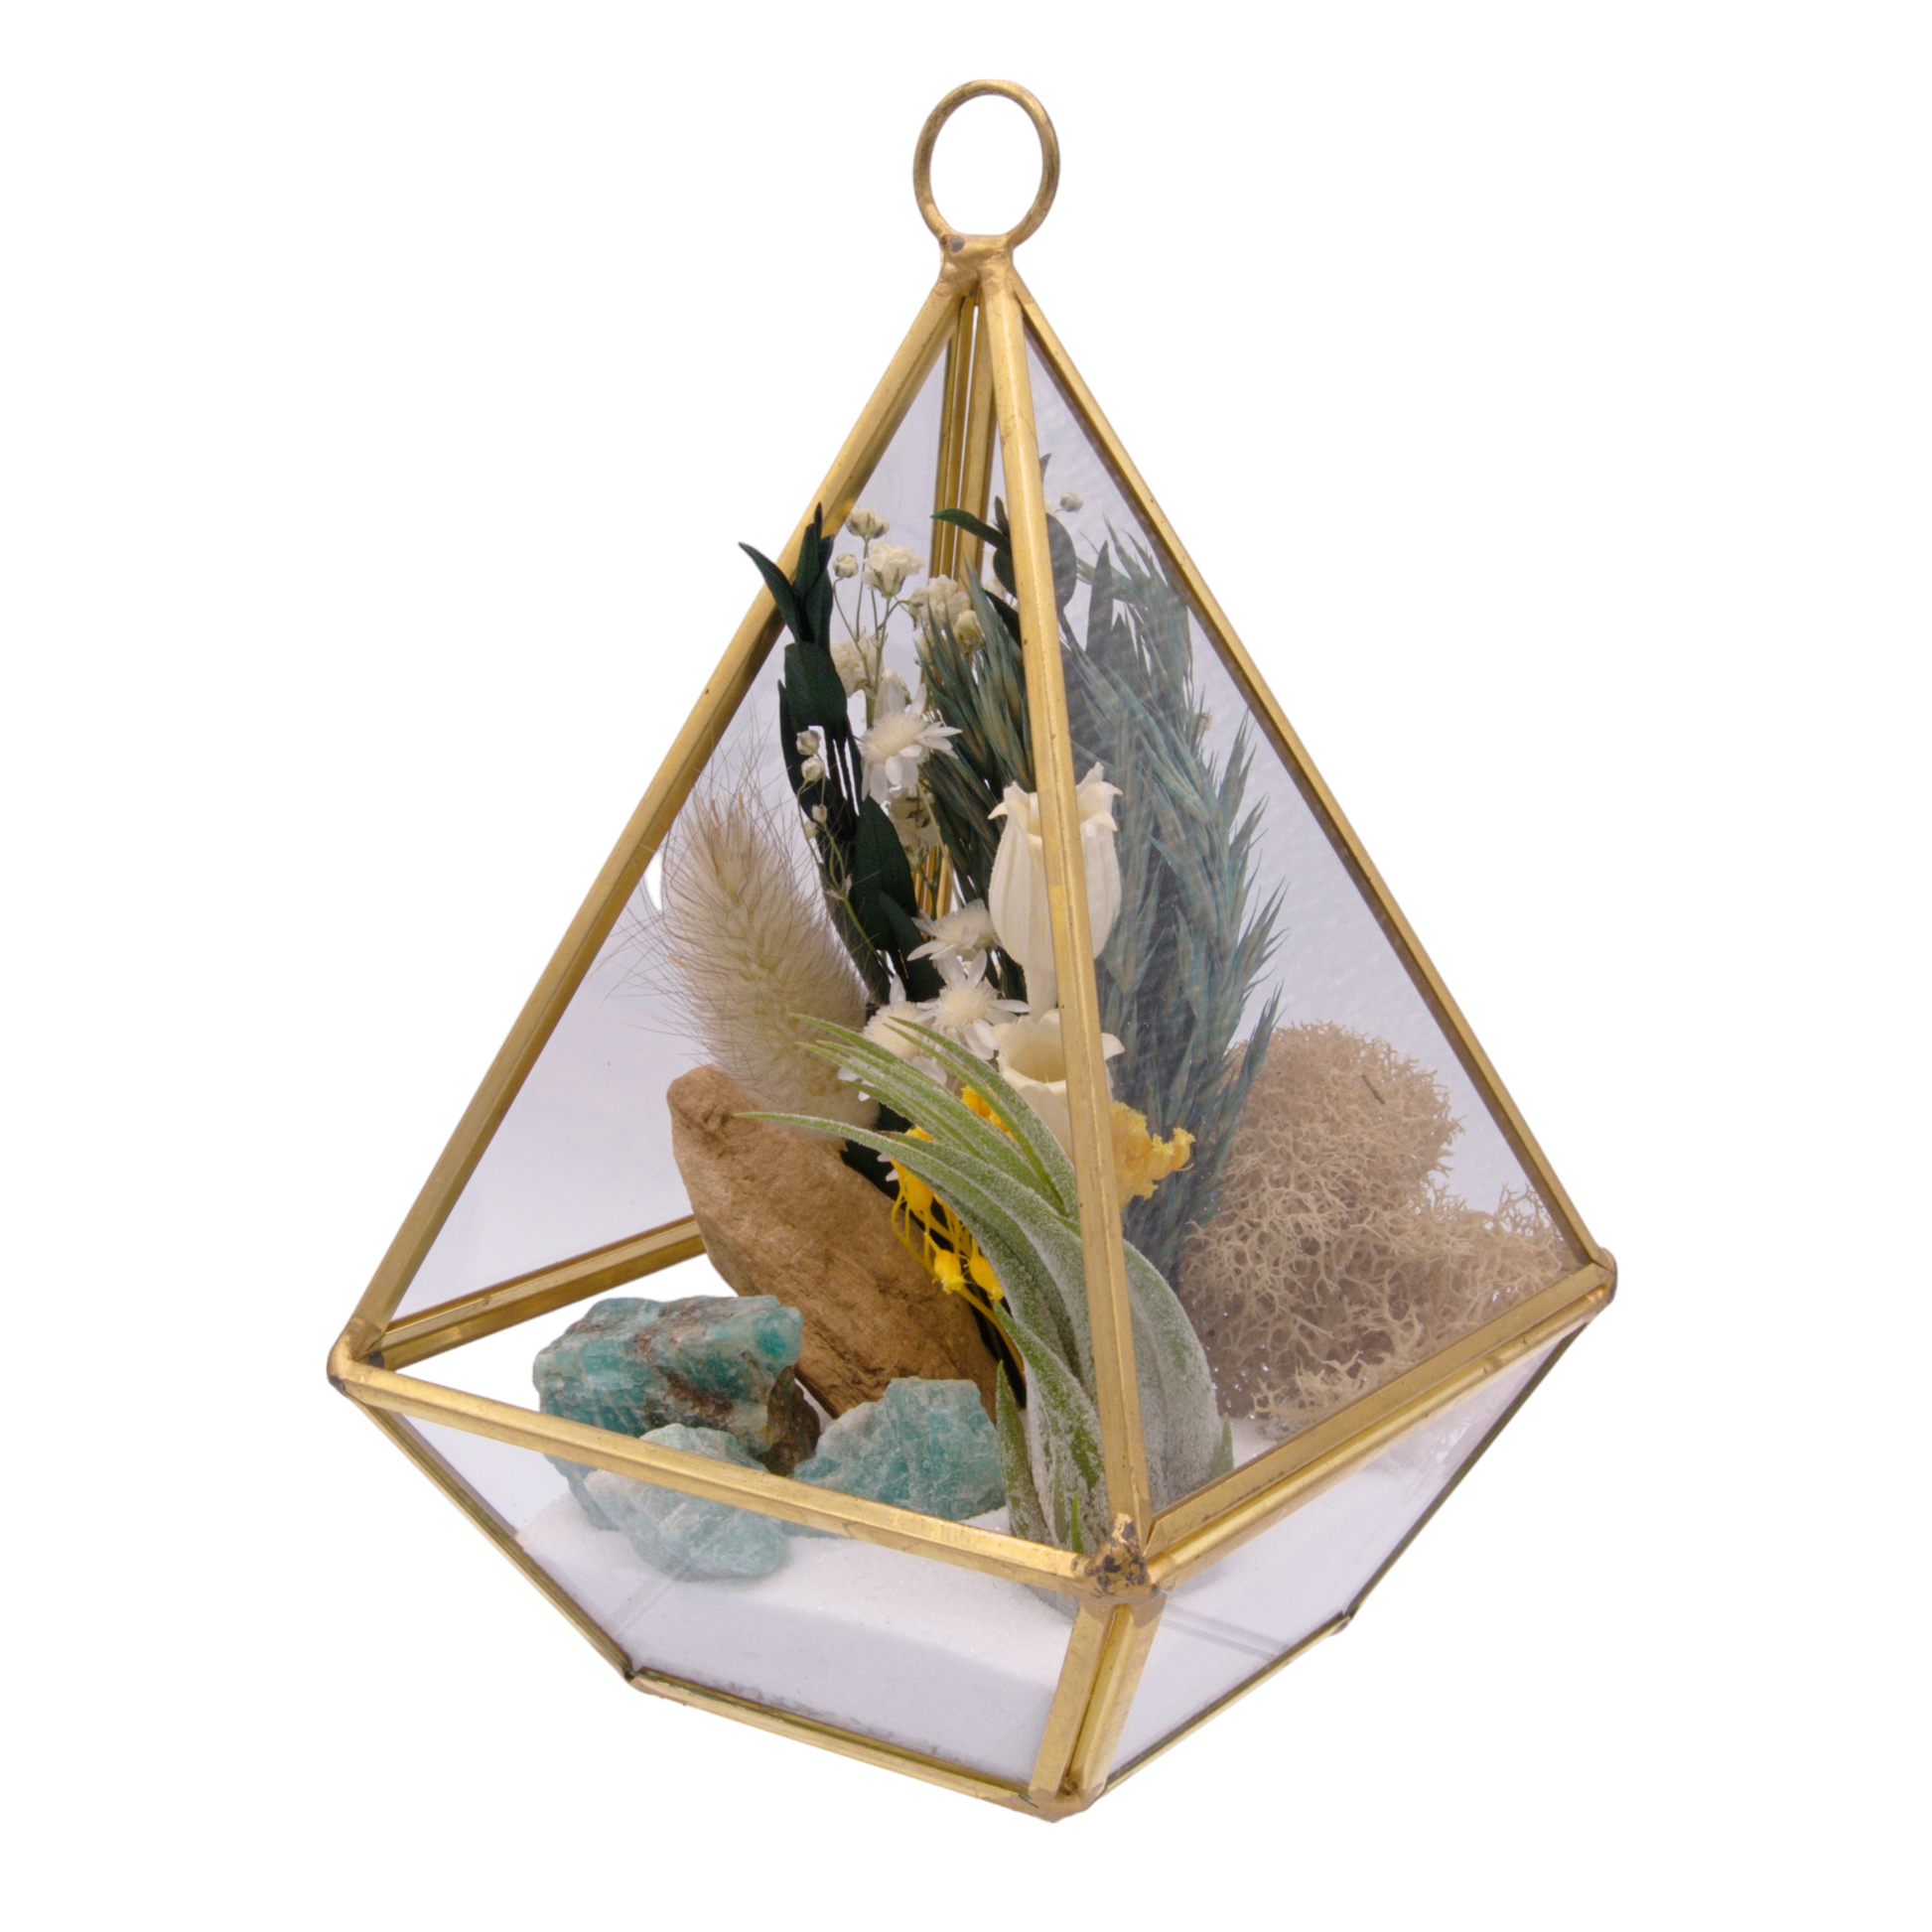 Victorian gold airplant terrarium with sand, dried flowers, moss, wood and amazonite crystals